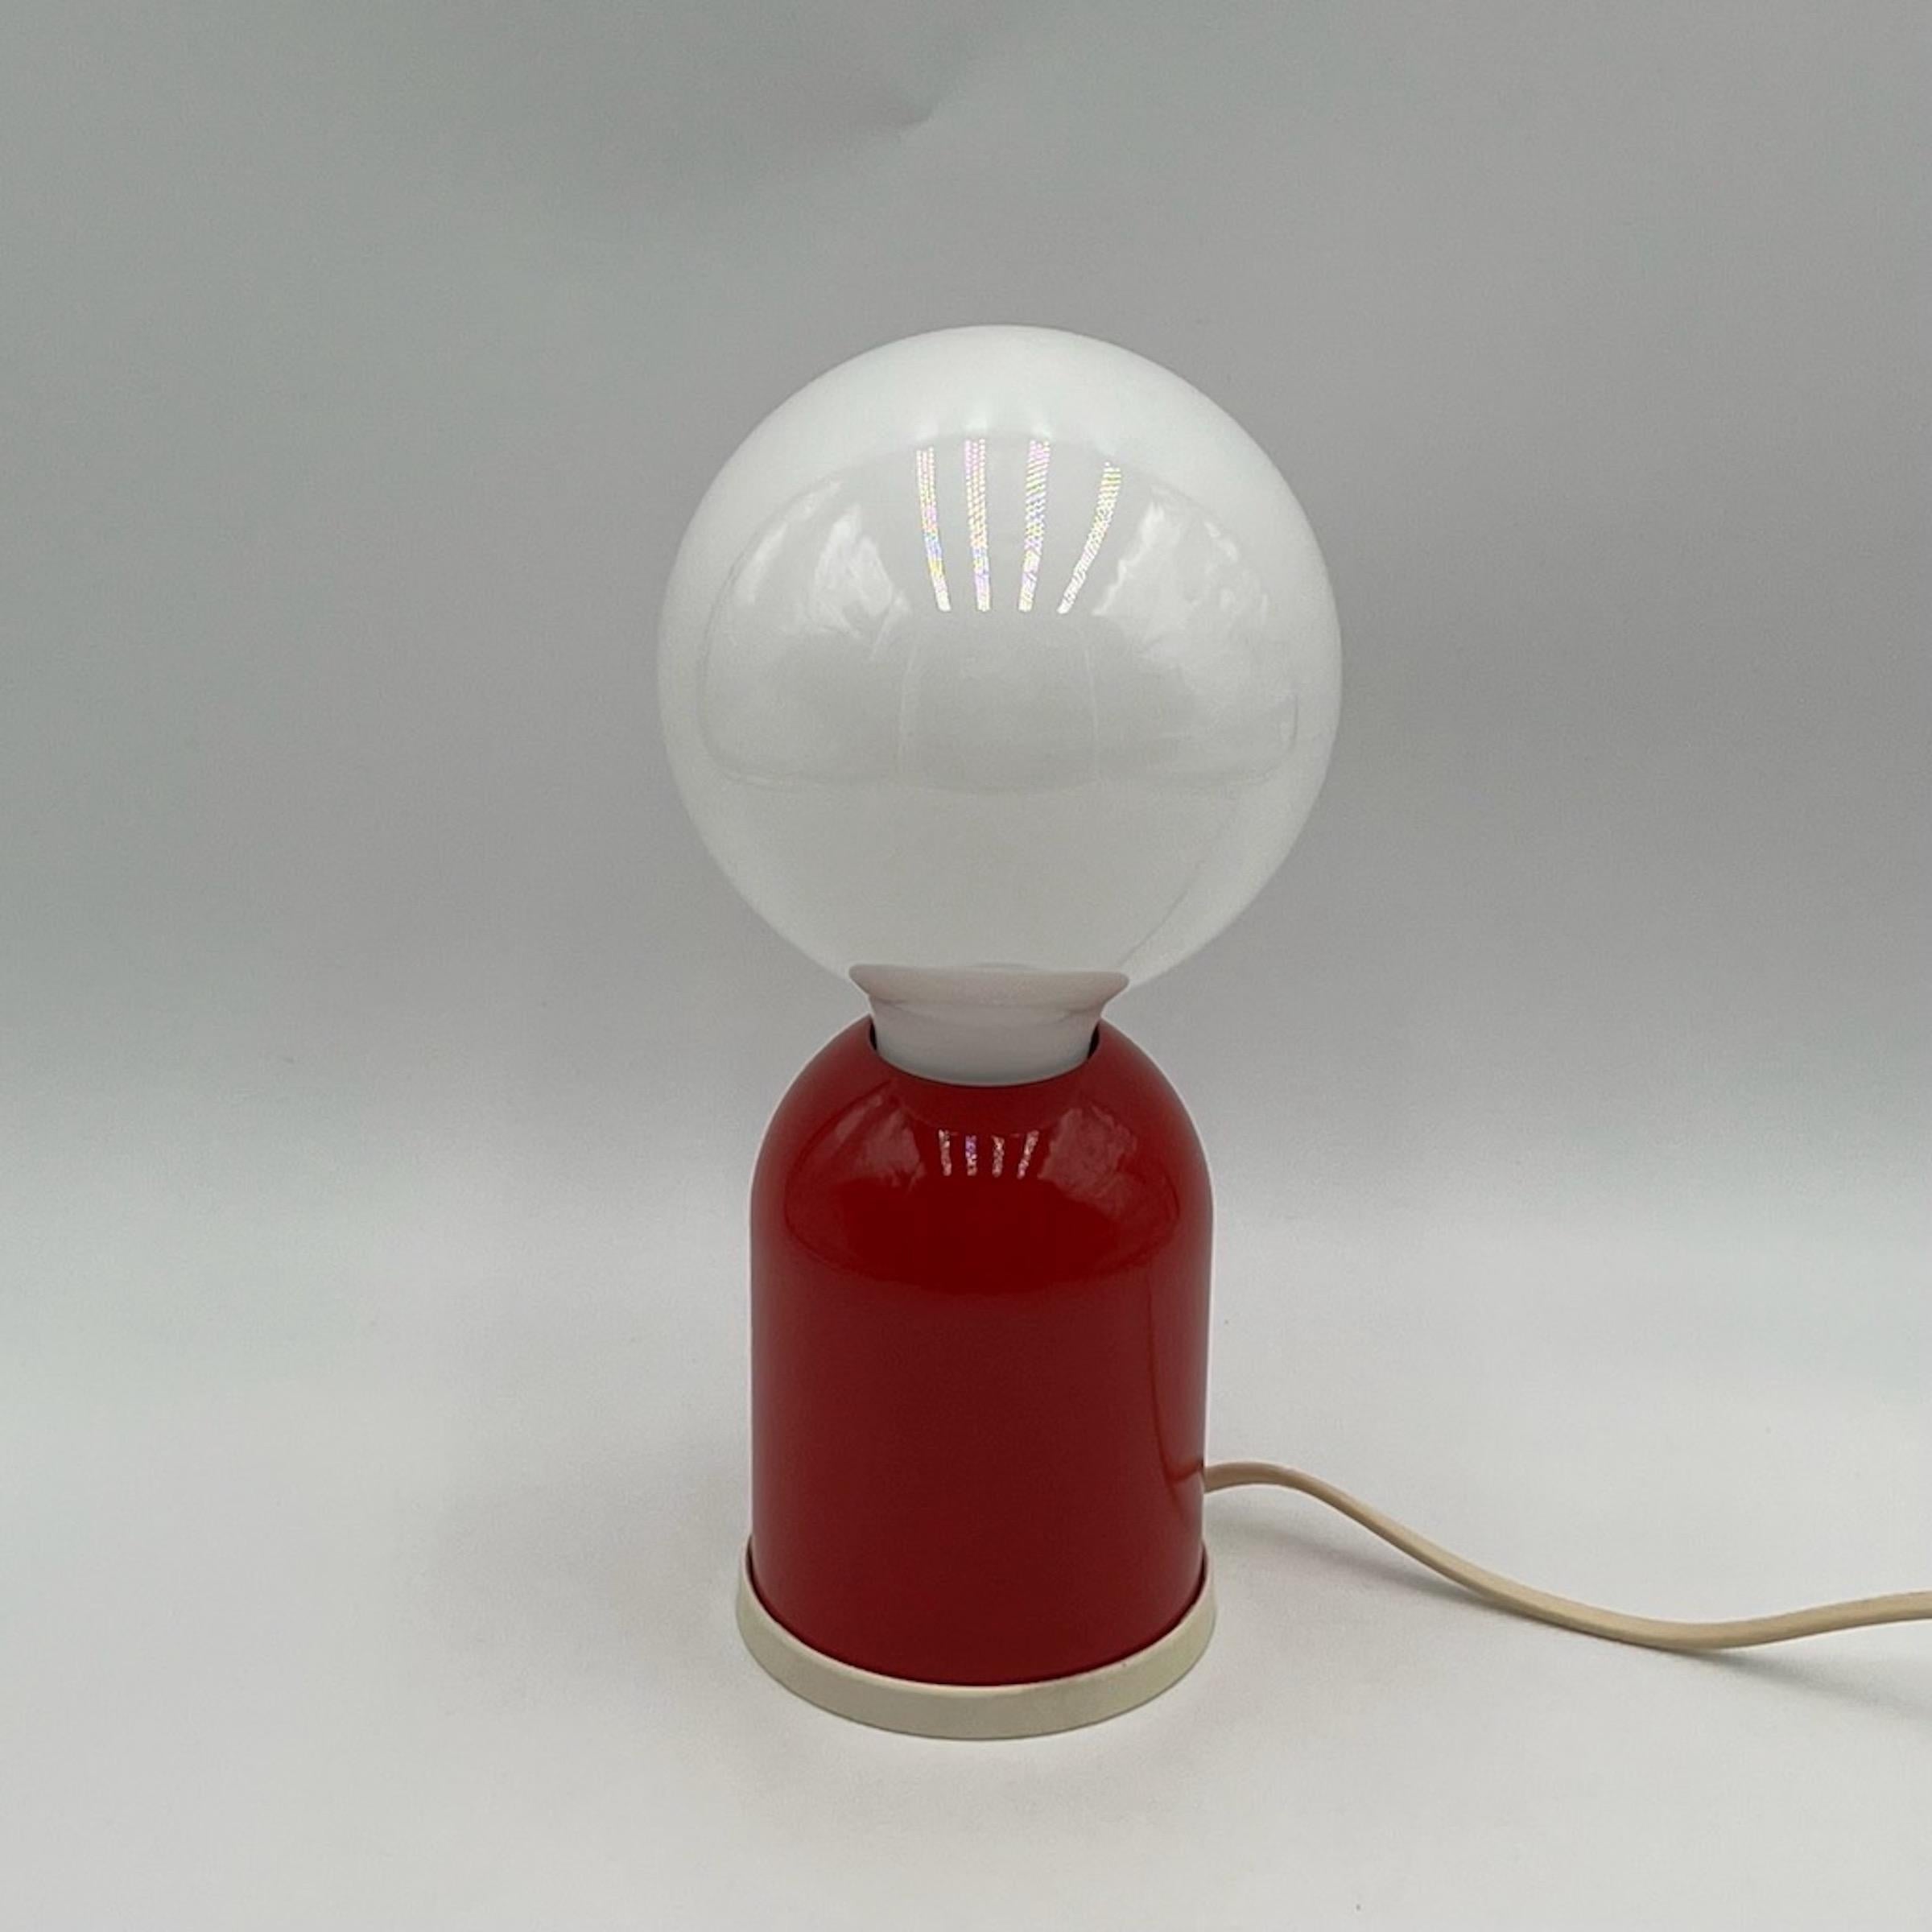 Italian Minimalistic Table Lamp in Lacquered Red Metal by Targetti Sankey, 1980s For Sale